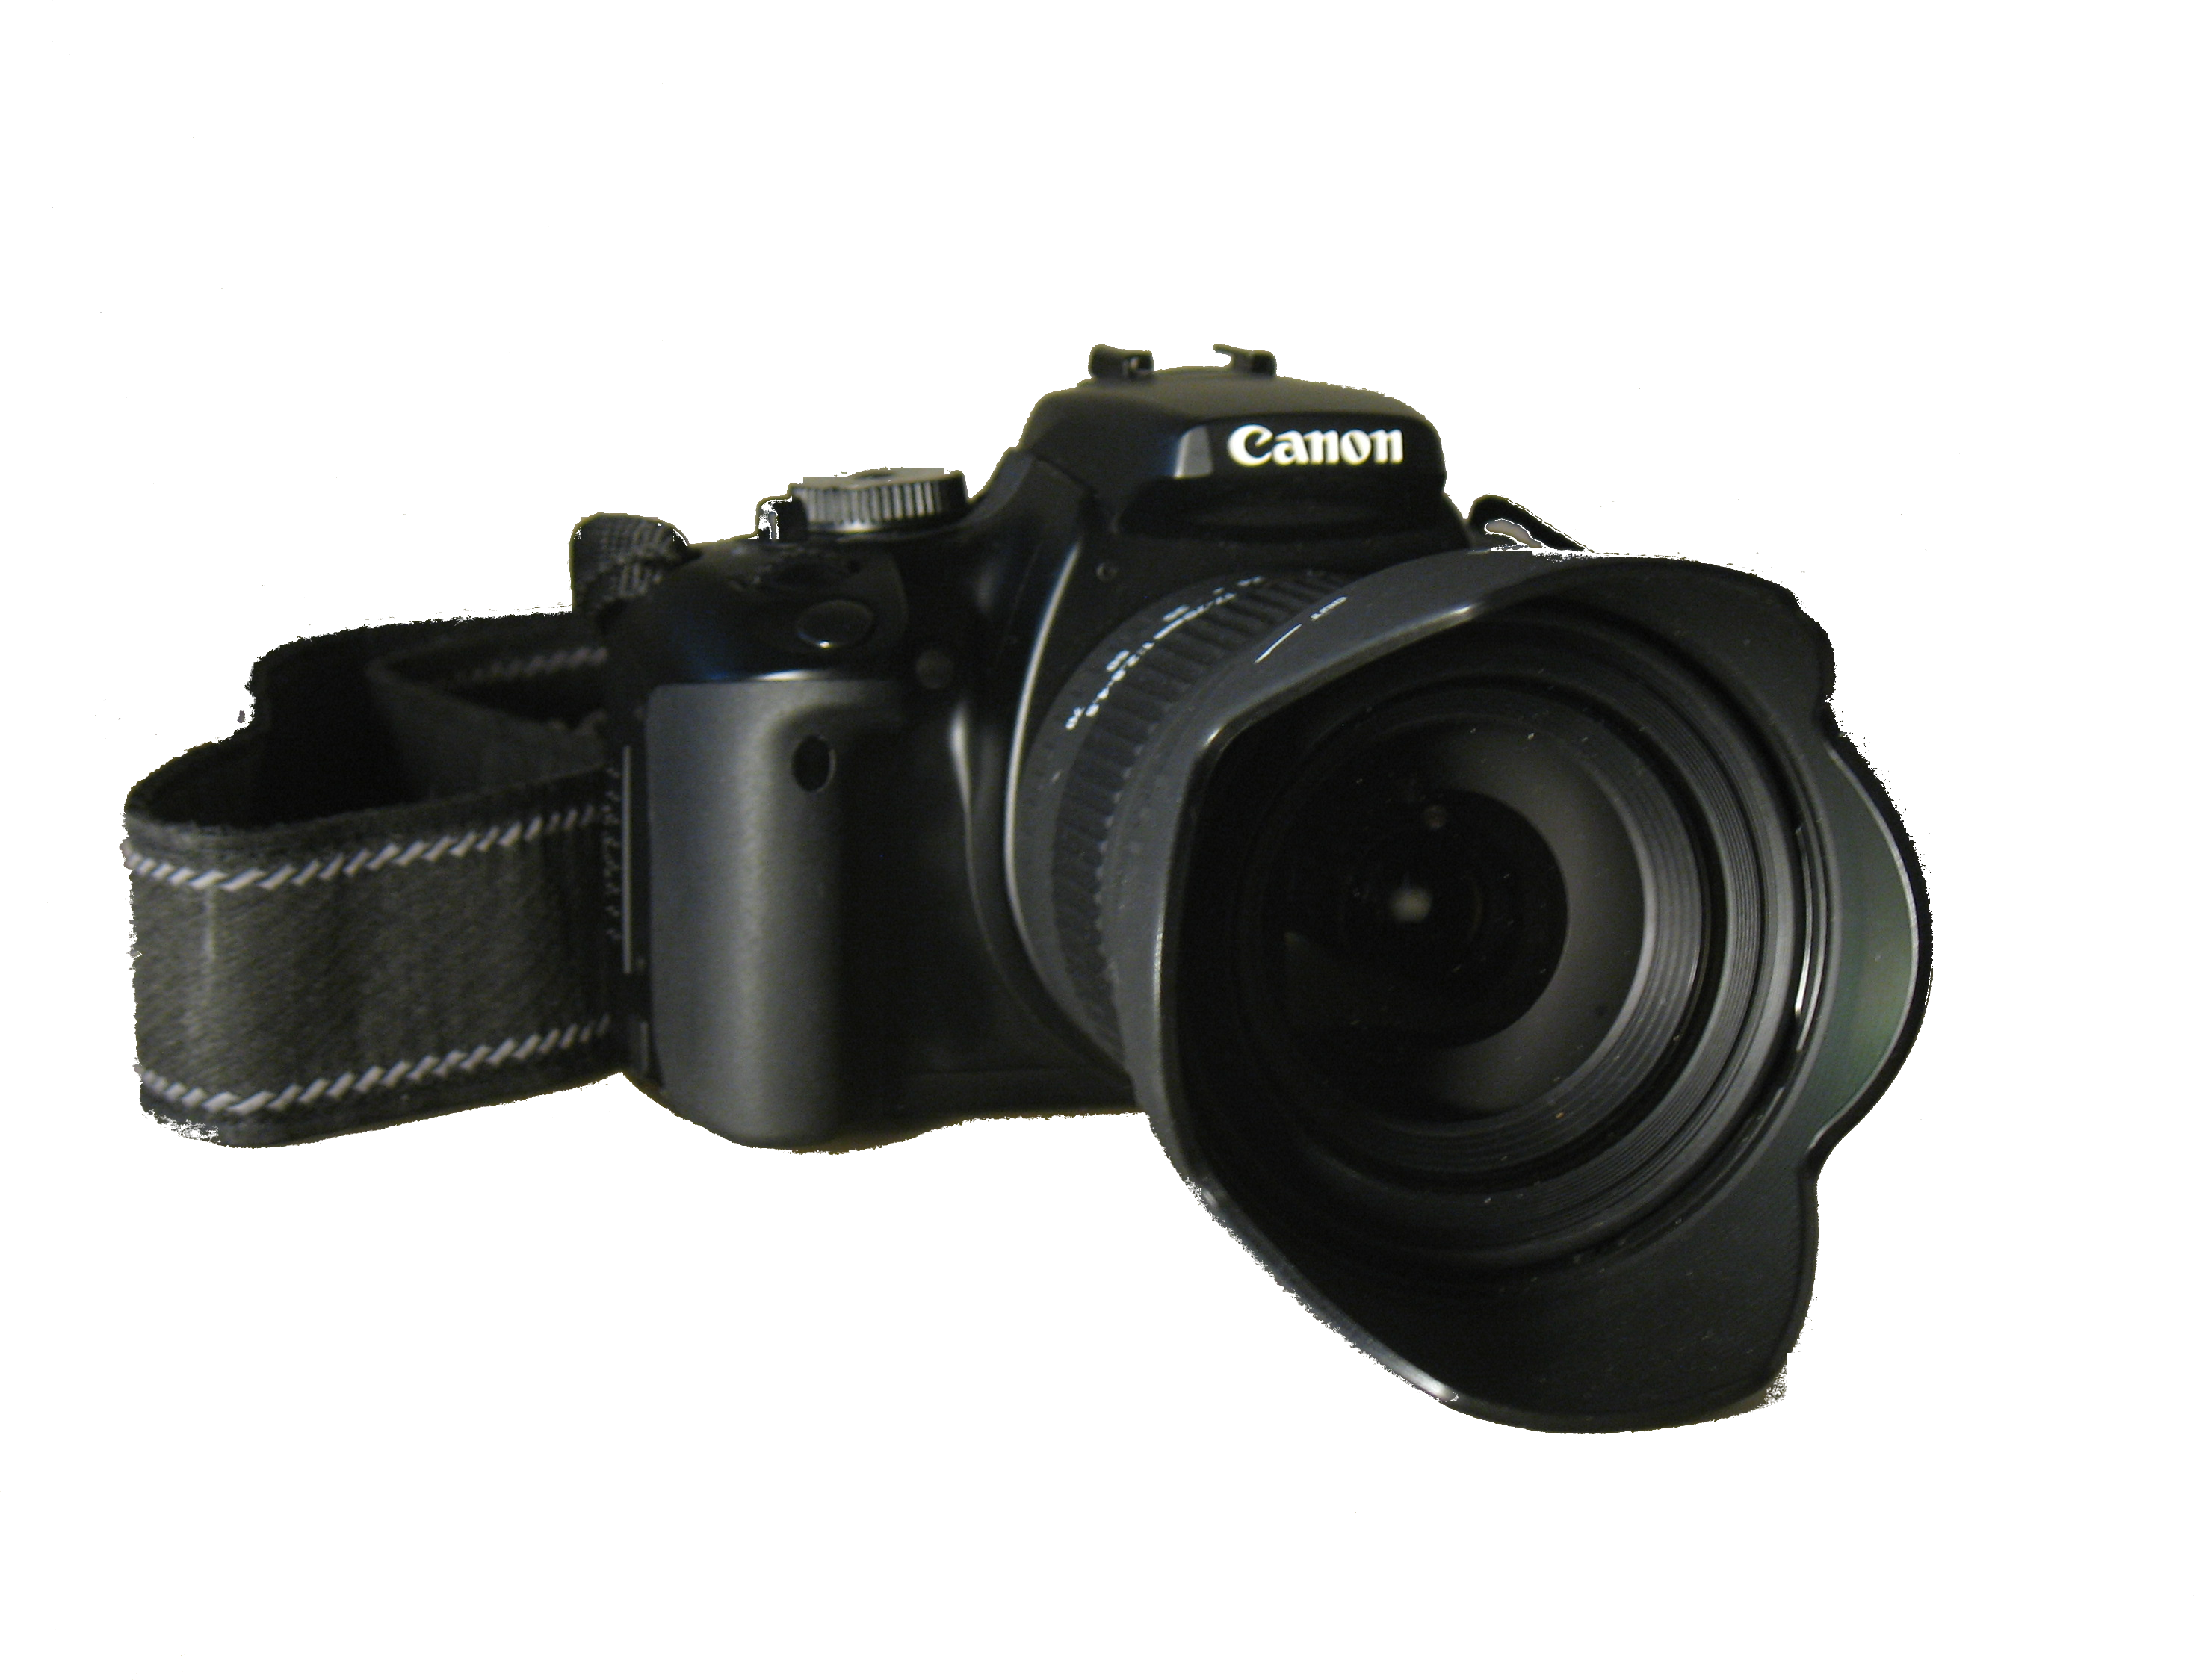 The D5100 is a new digital SL